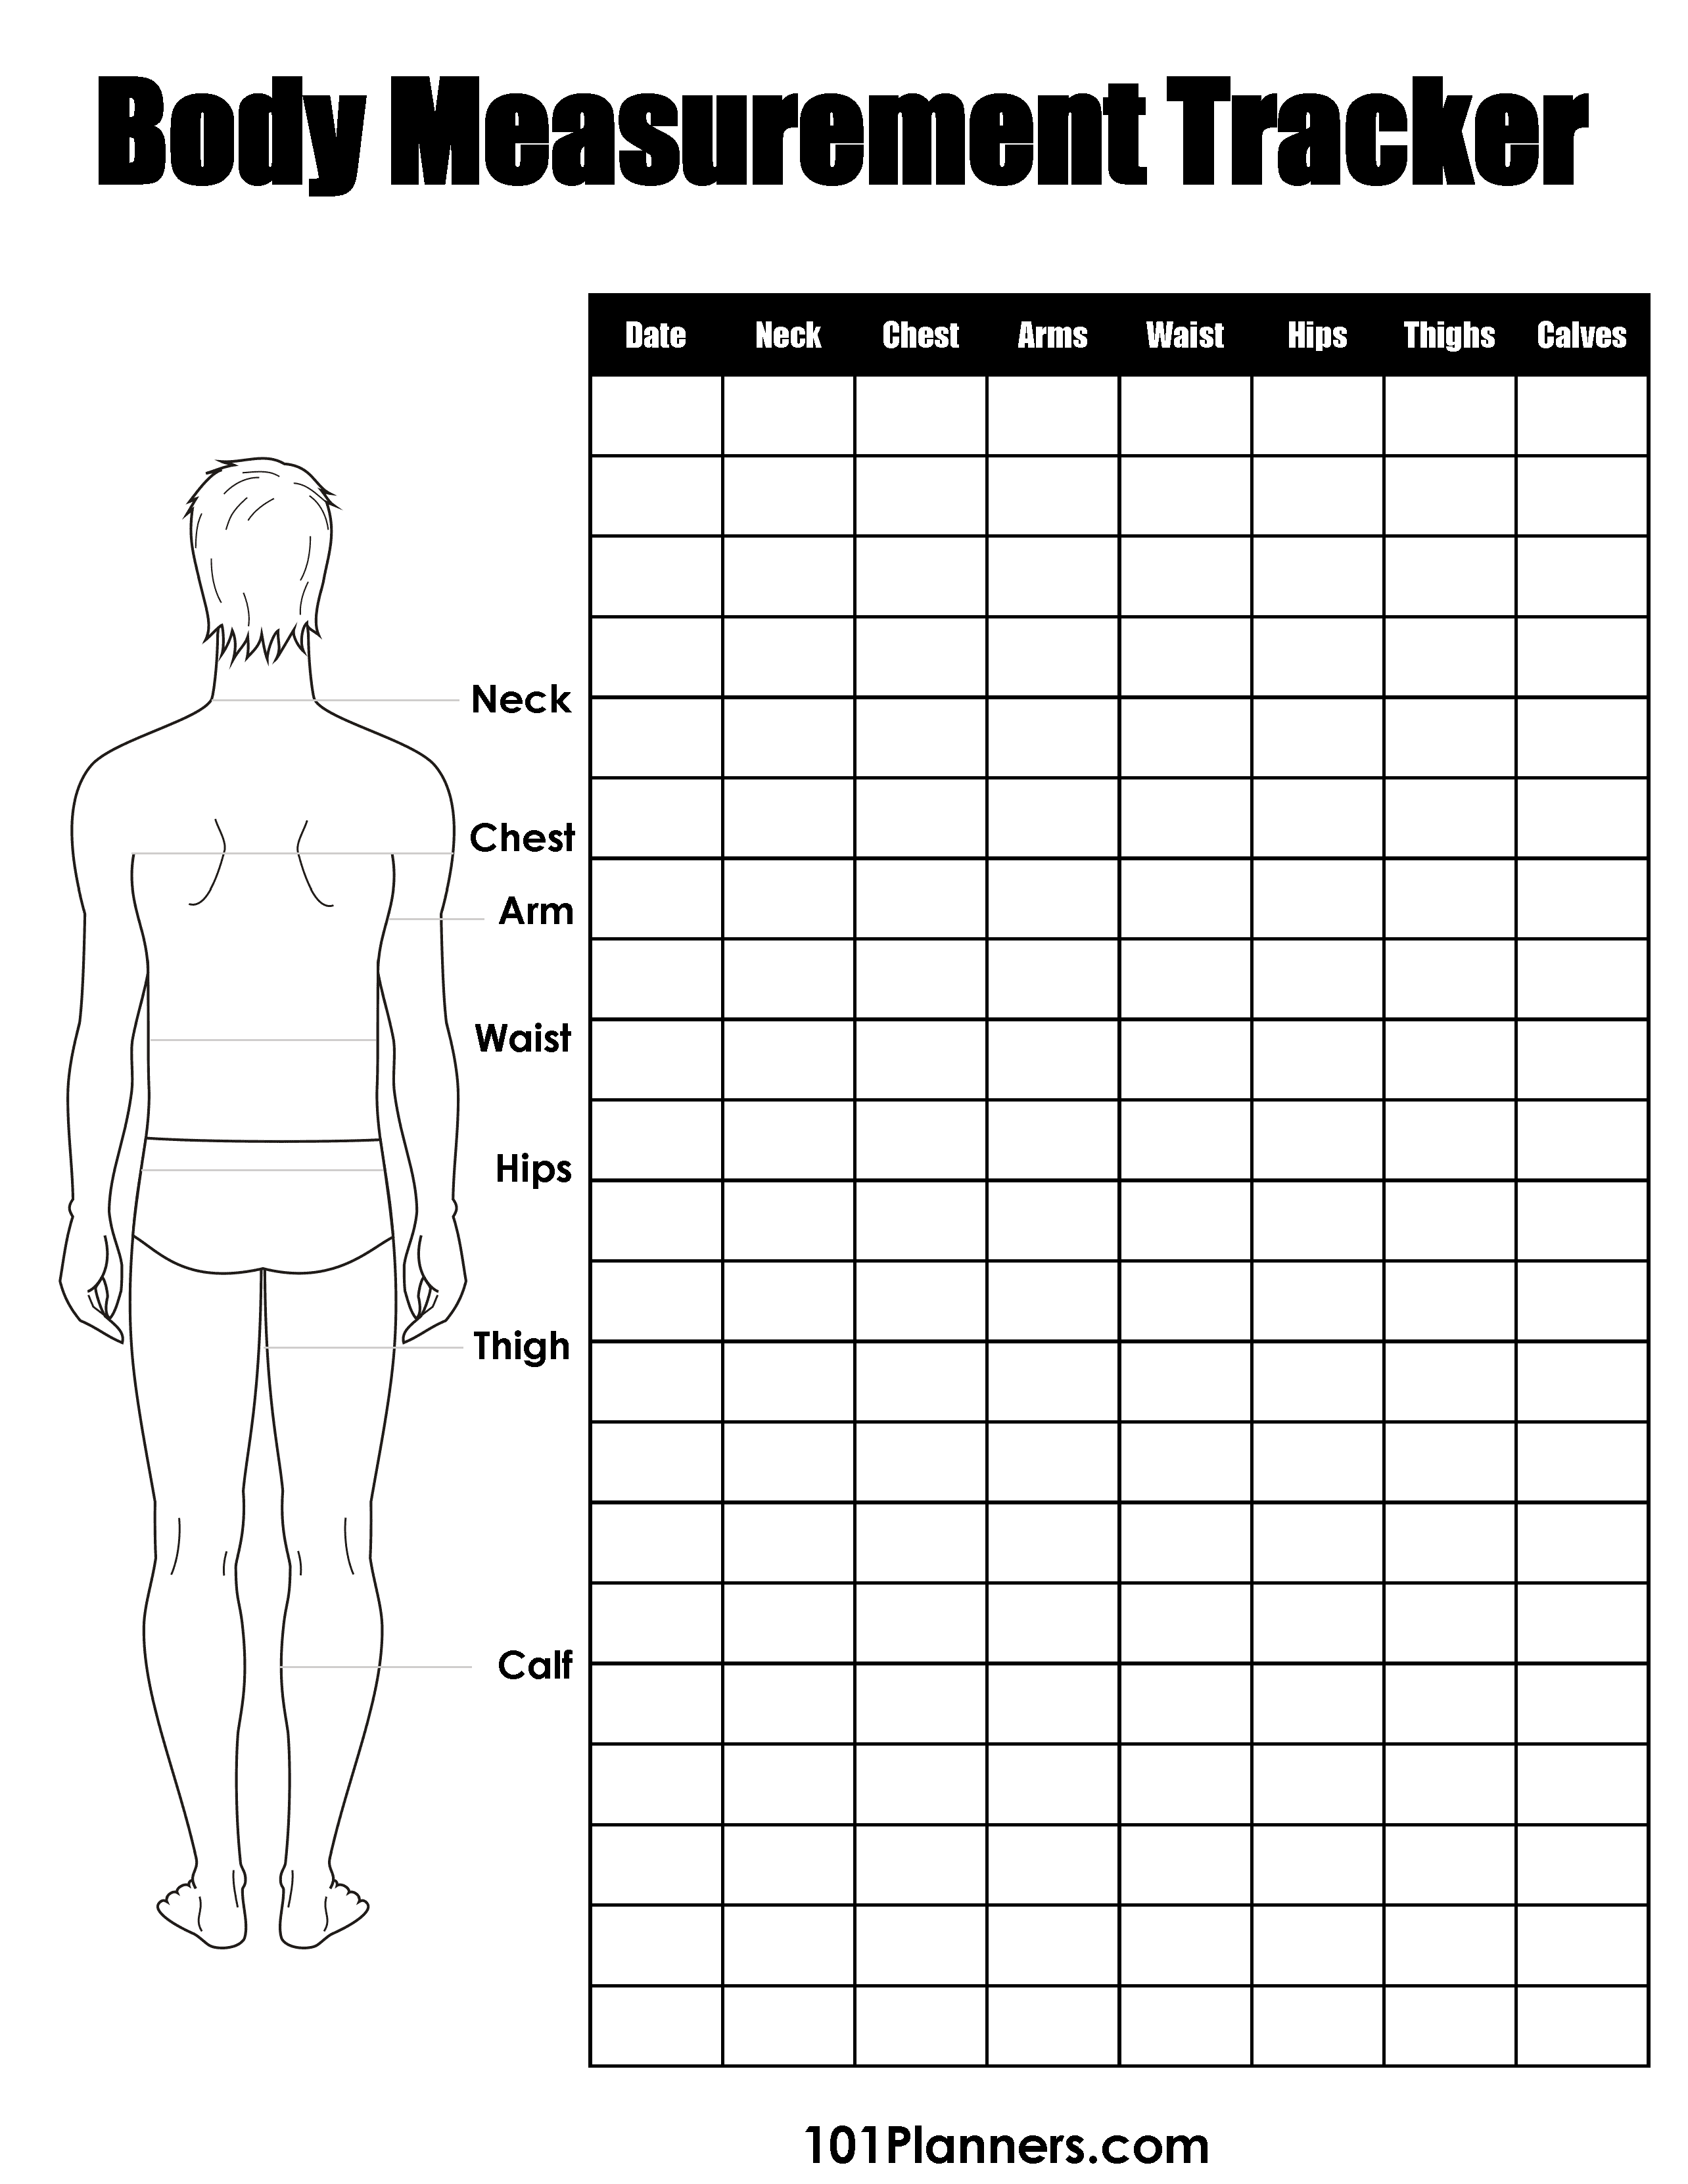 Free Printable Body Measurement Chart For Female in PDF, PNG and JPG  Formats · InkPx